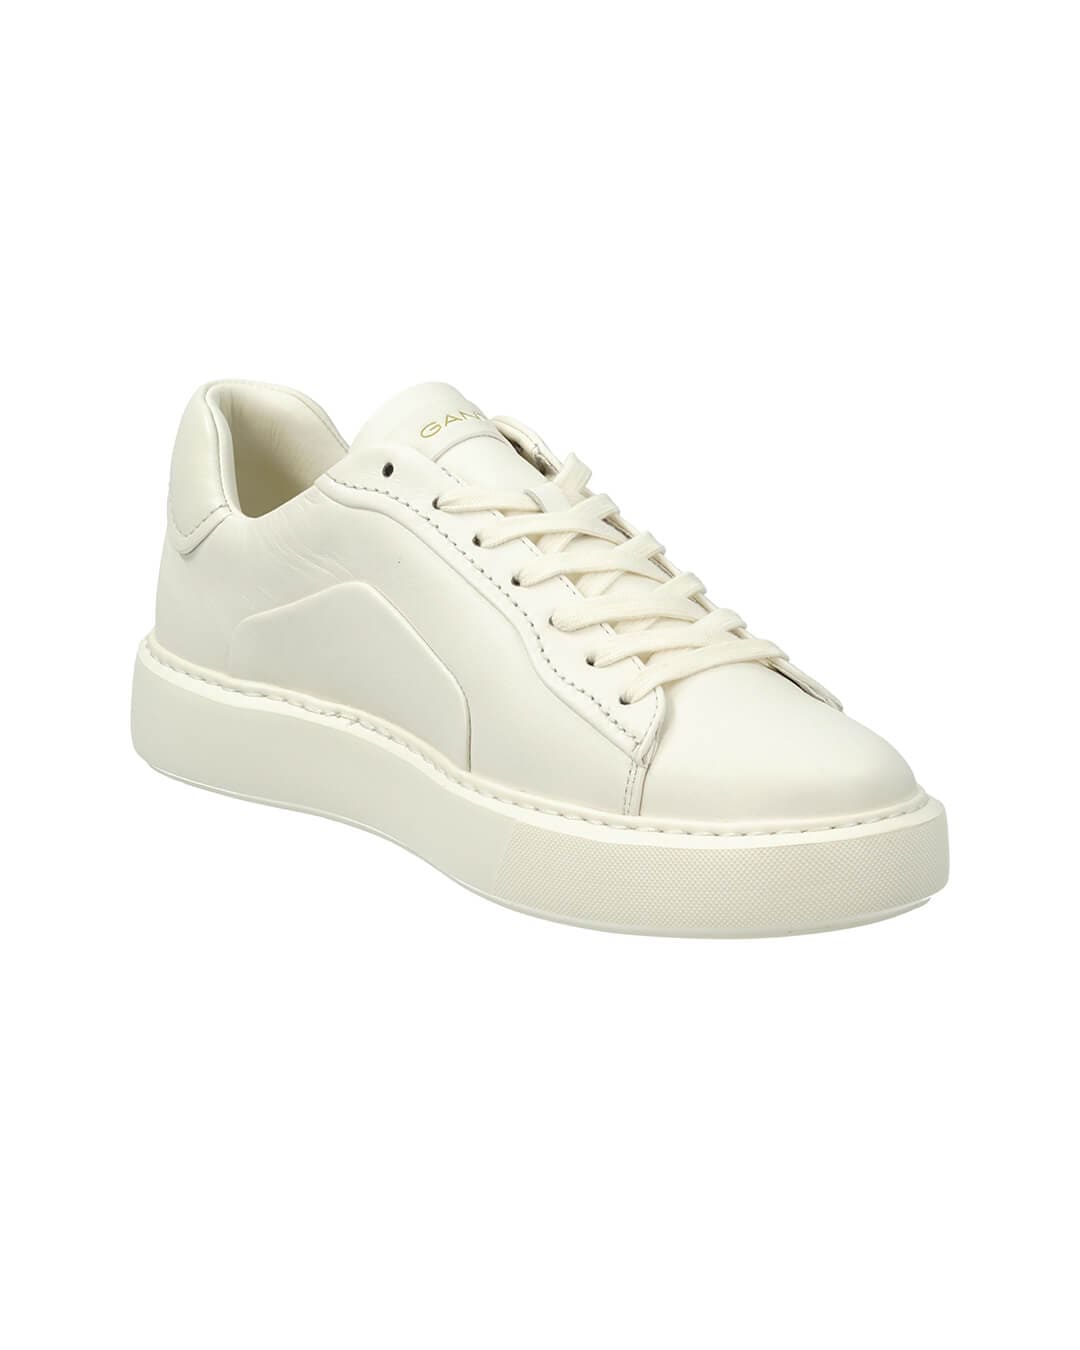 Gant Shoes Gant Off White Zonick Sneakers